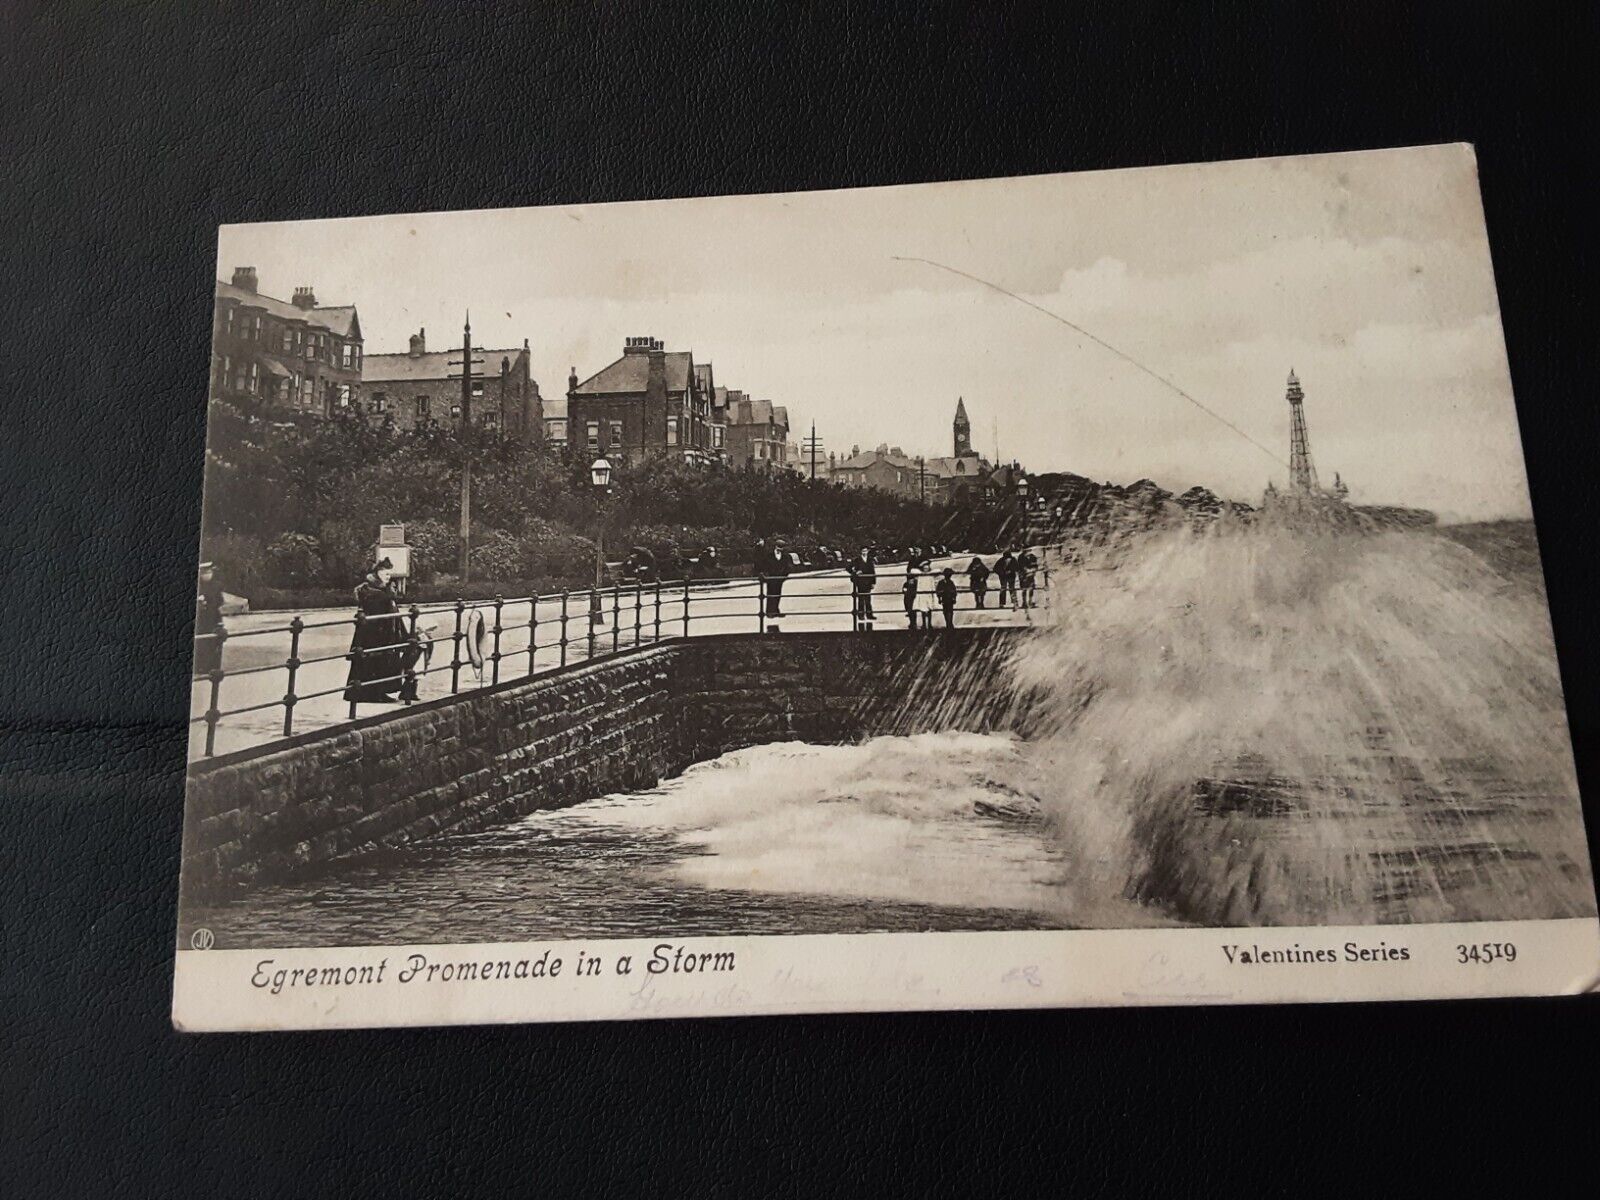 House Clearance - Old Valentines service of Egremont Promenade in a Storm, Cumbria posted 1907